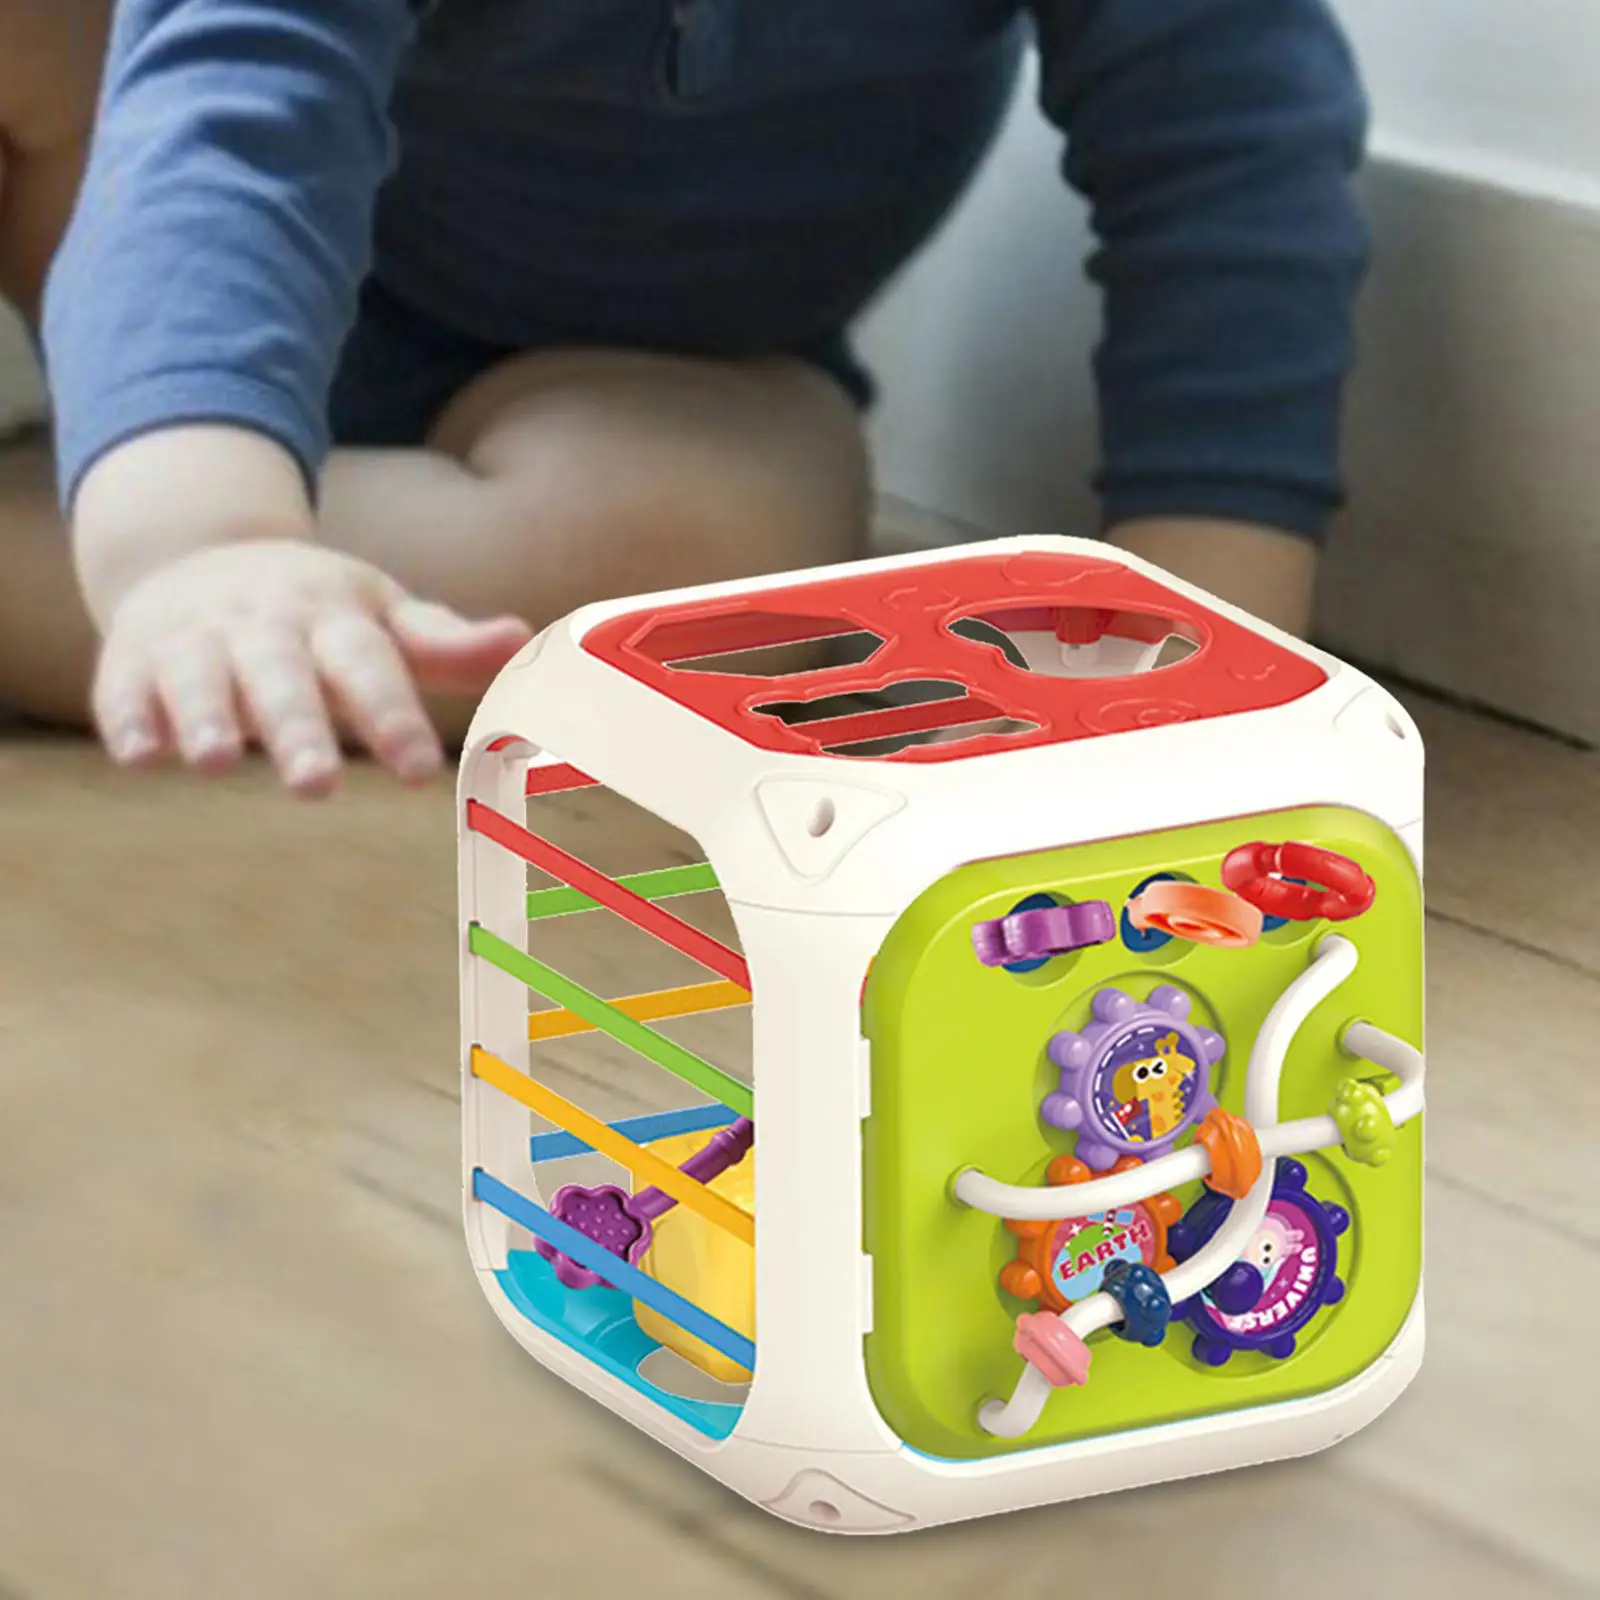 Baby Shape Sorter Toys Matching Educational for 1 2 3 Year Old Babies Kids